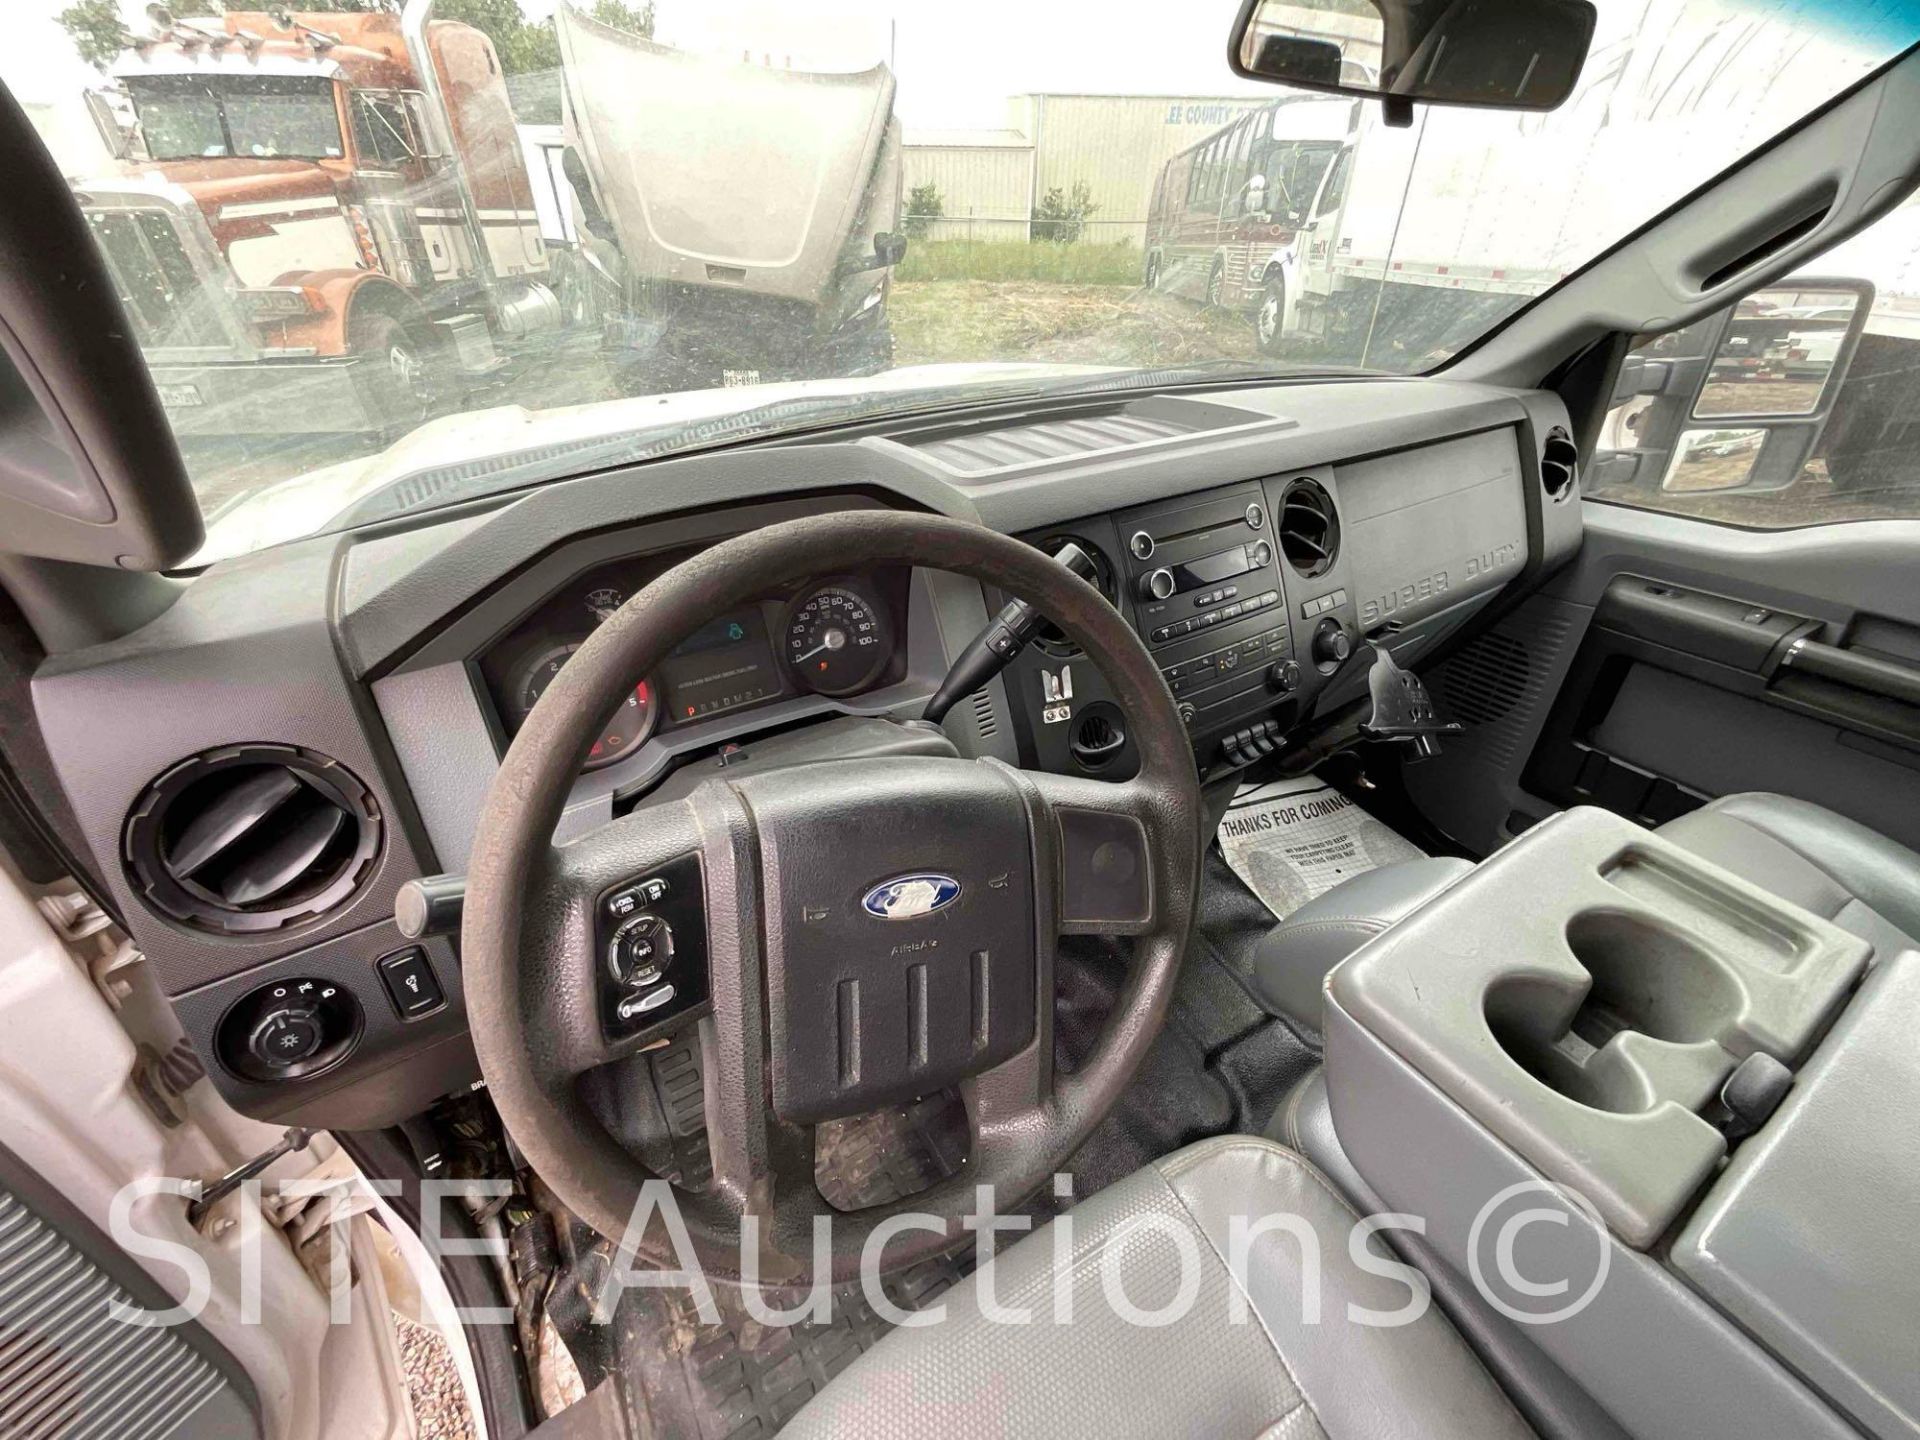 2013 Ford F350 SD Crew Cab Service Truck - Image 20 of 22